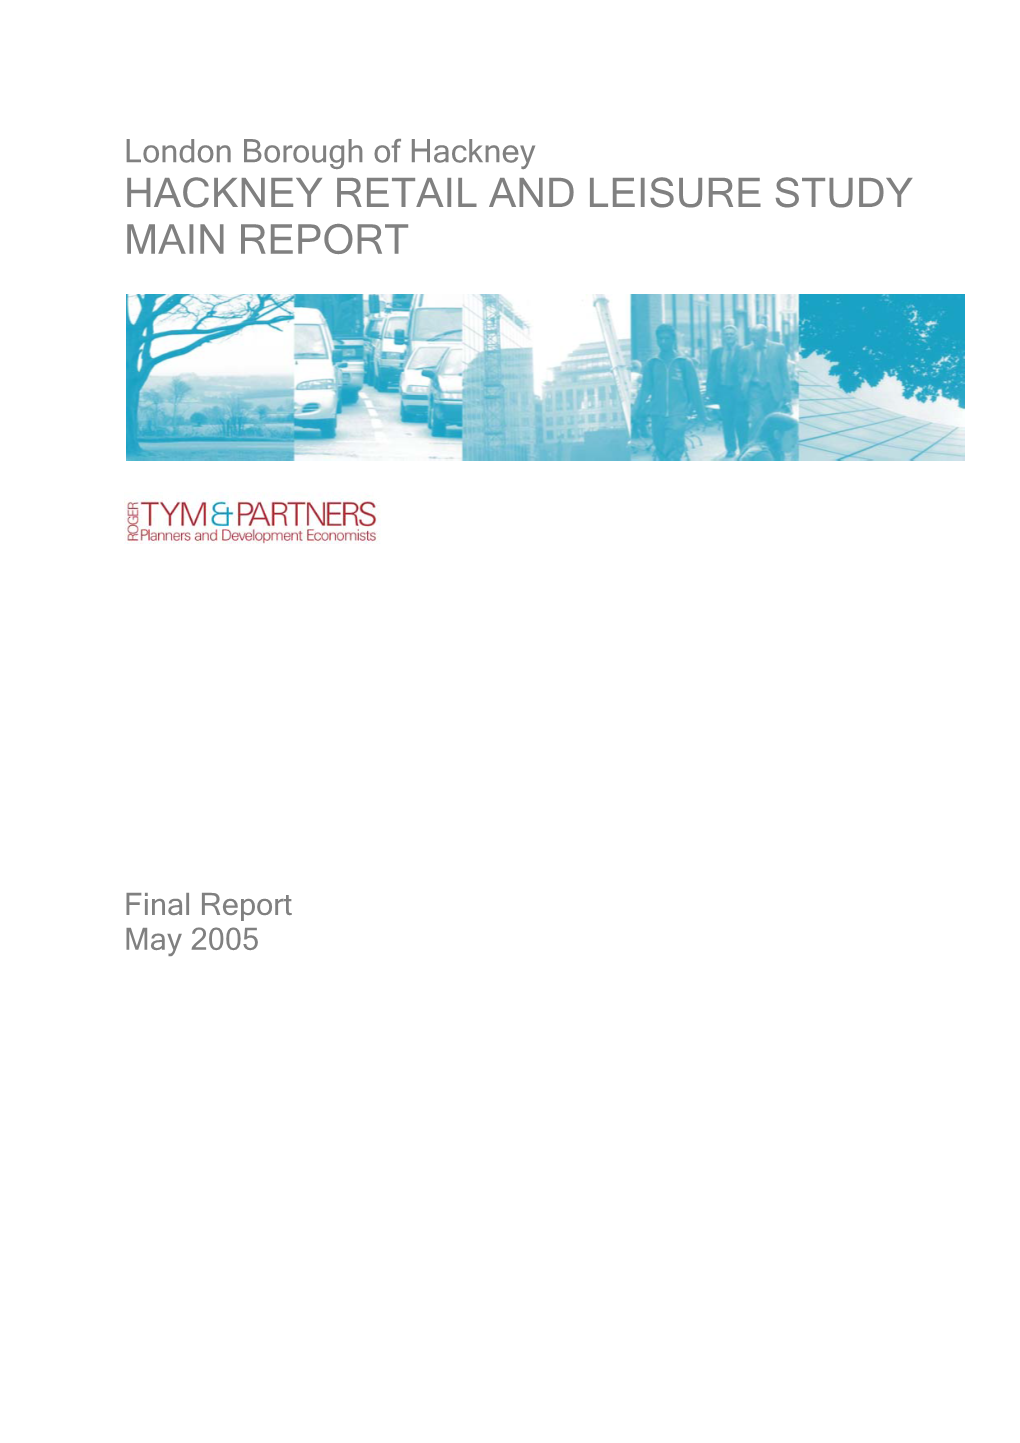 Hackney Retail and Leisure Study Main Report